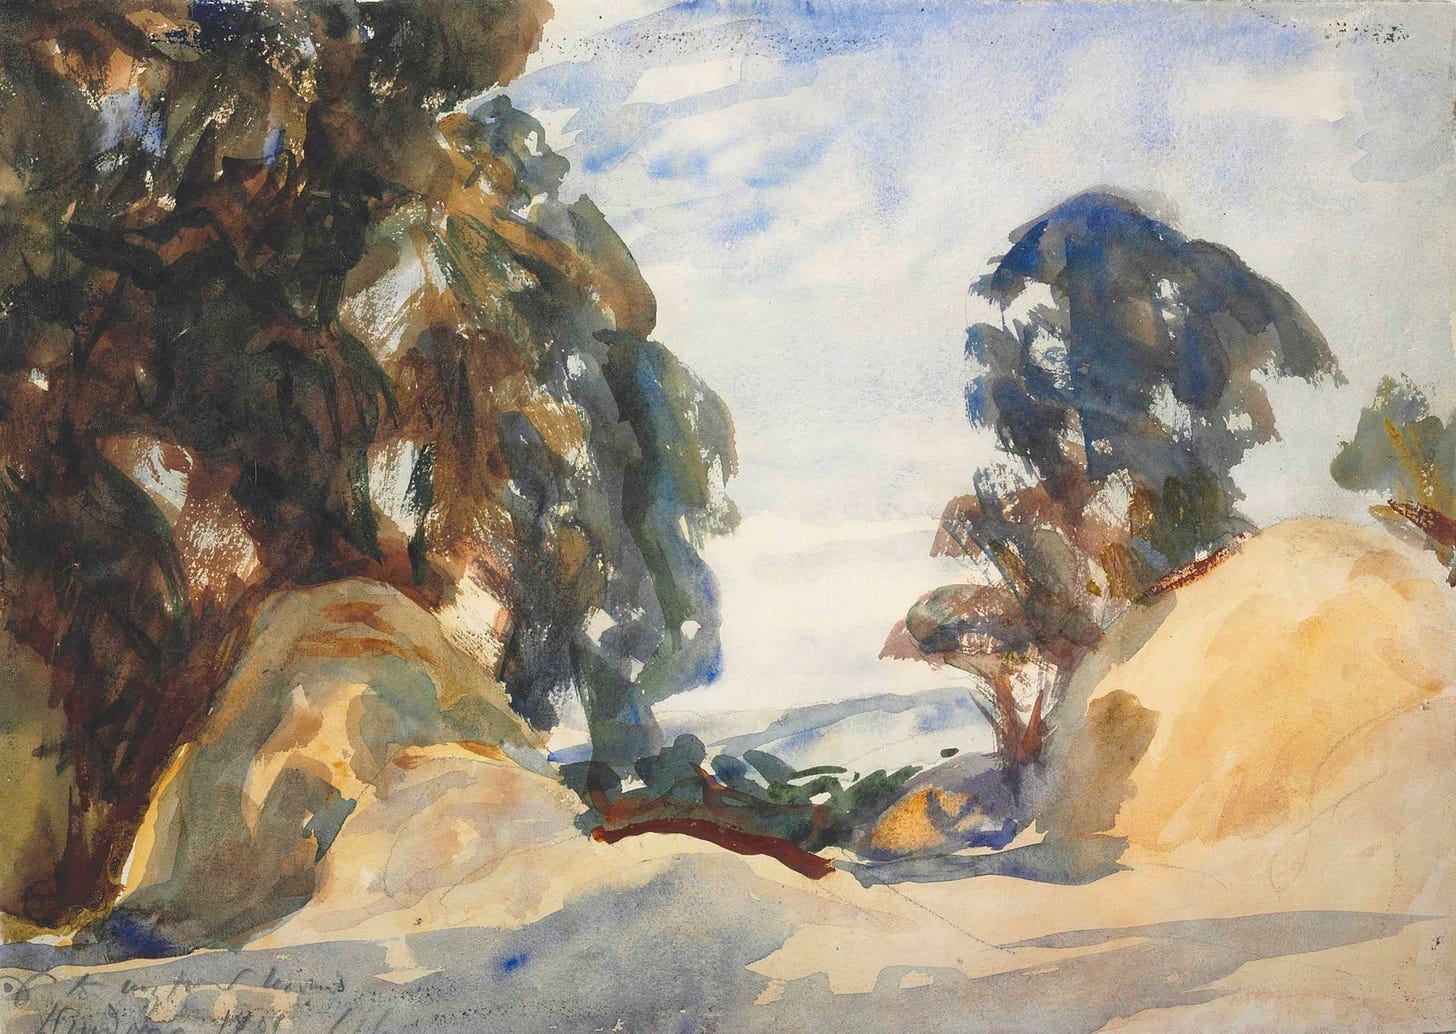 Landscape with trees (1901)